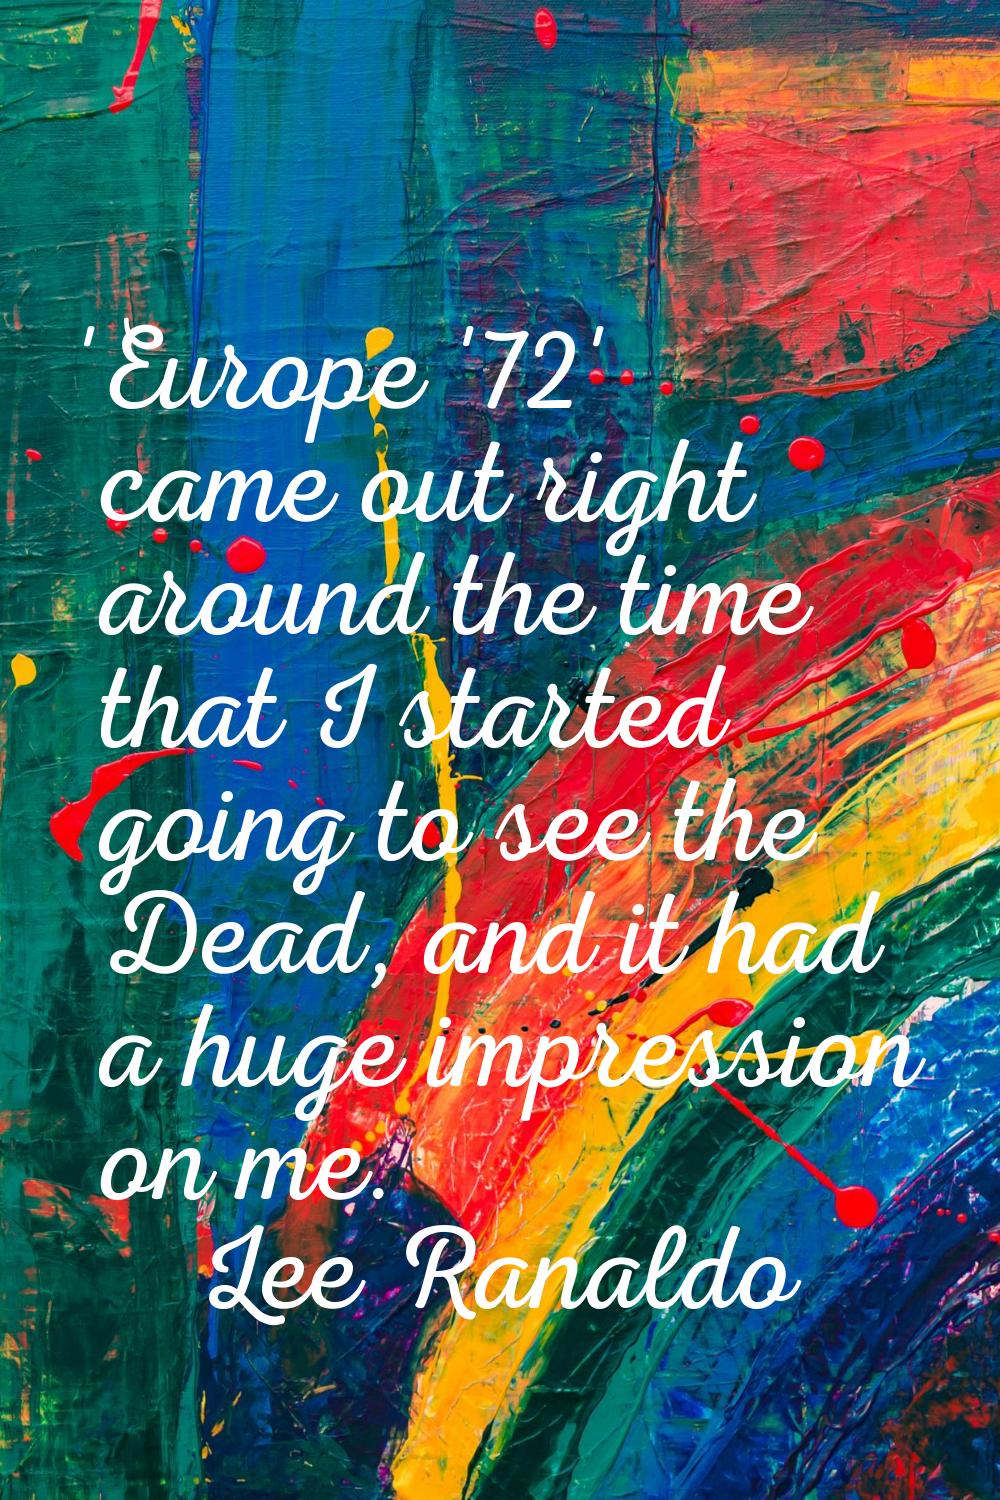 'Europe '72' came out right around the time that I started going to see the Dead, and it had a huge